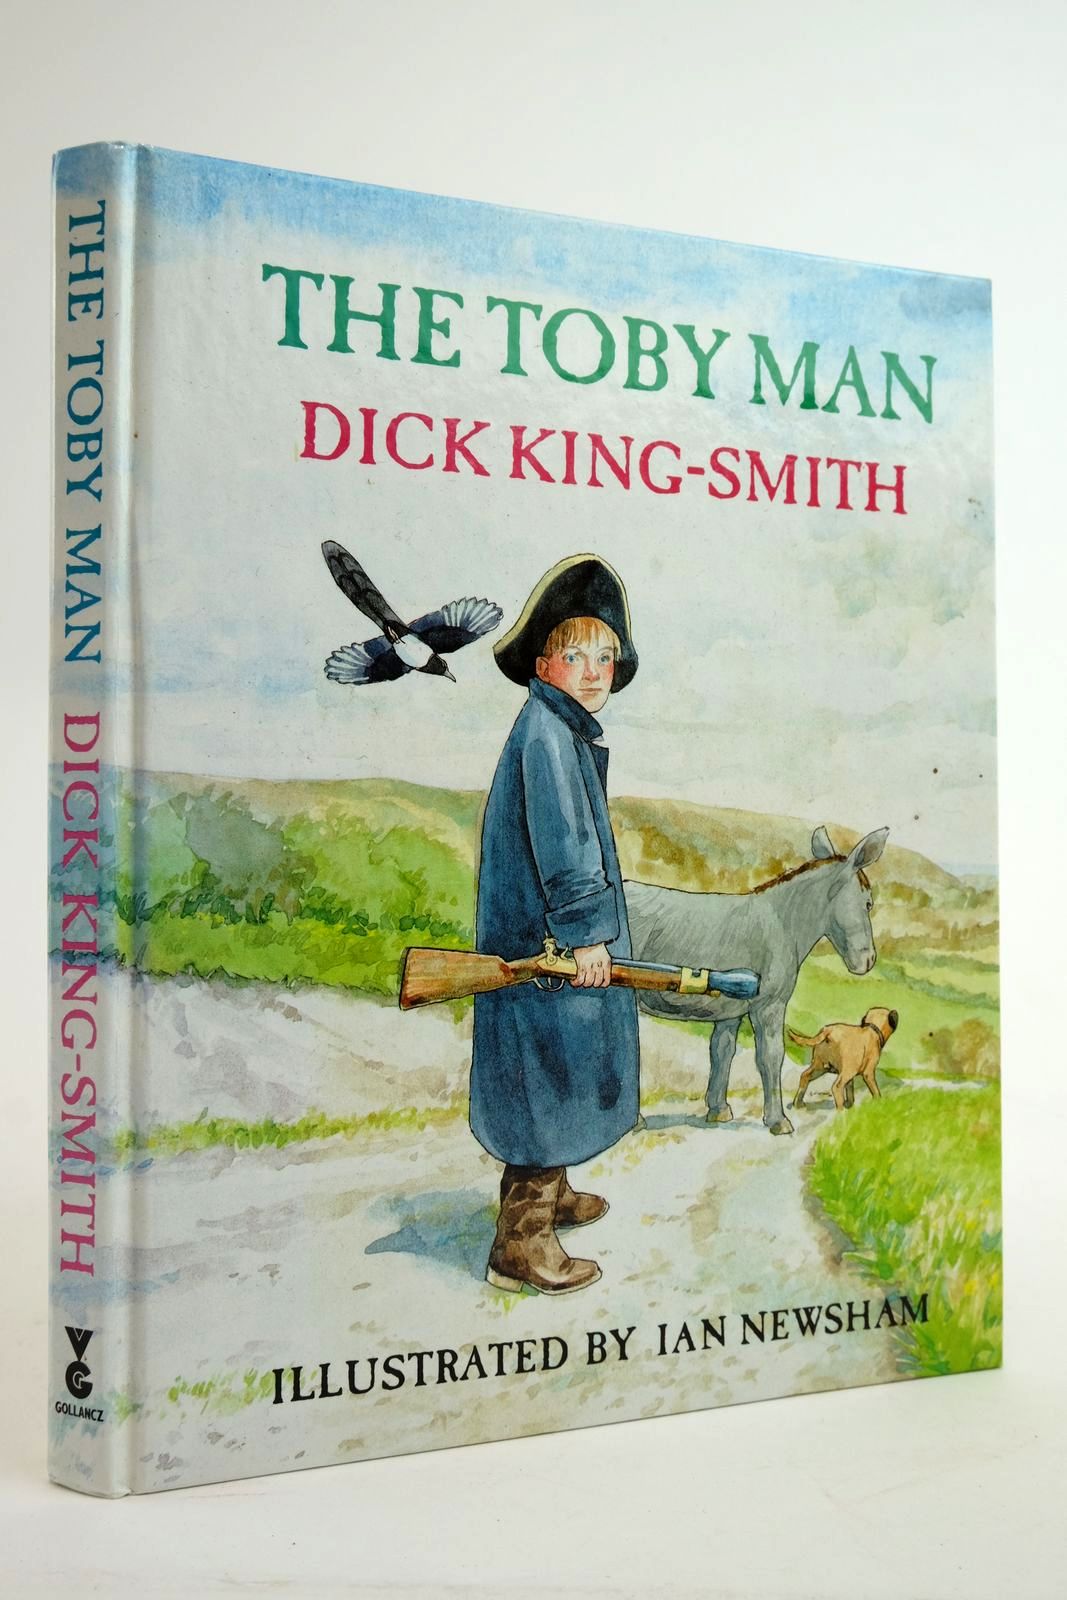 Photo of THE TOBY MAN written by King-Smith, Dick illustrated by Newsham, Ian published by Victor Gollancz Ltd. (STOCK CODE: 2135467)  for sale by Stella & Rose's Books